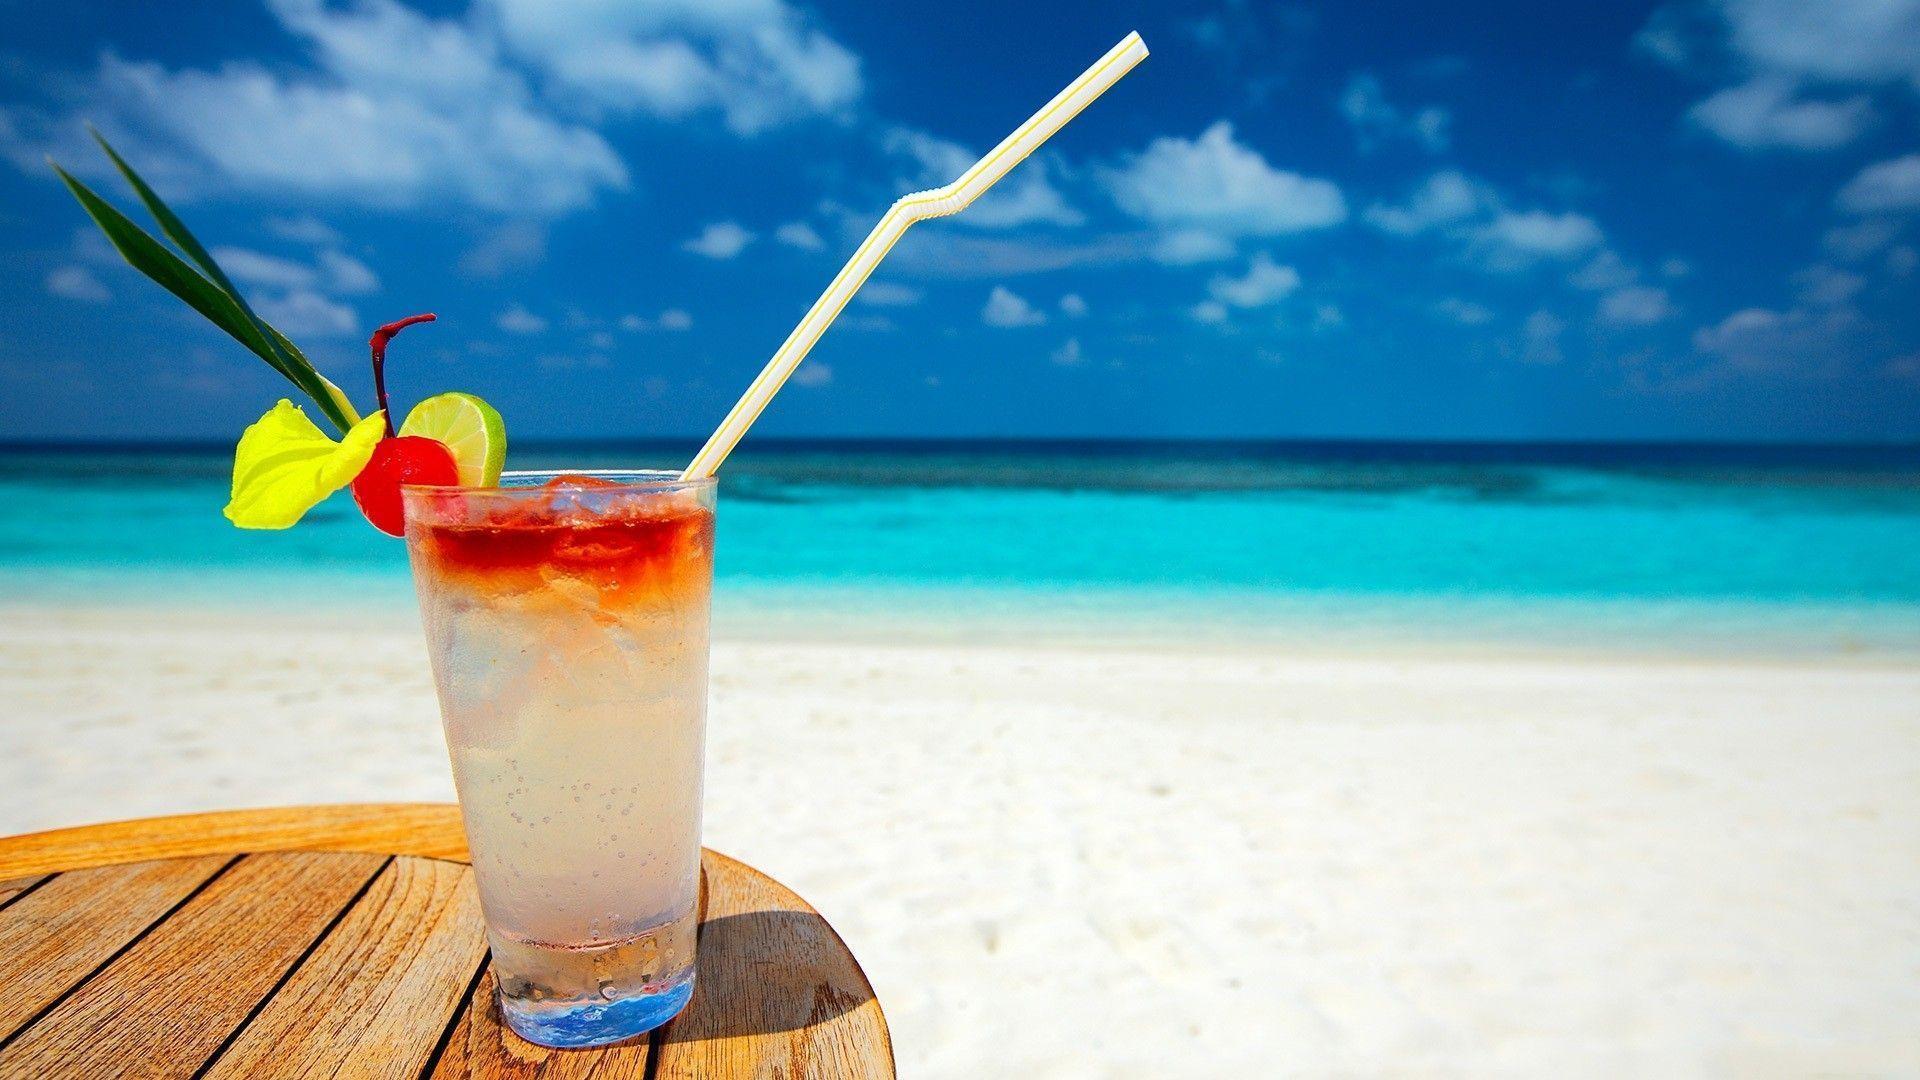 Tropical Beach Backgrounds : Latest Tropical Squash Drinks Full Hd